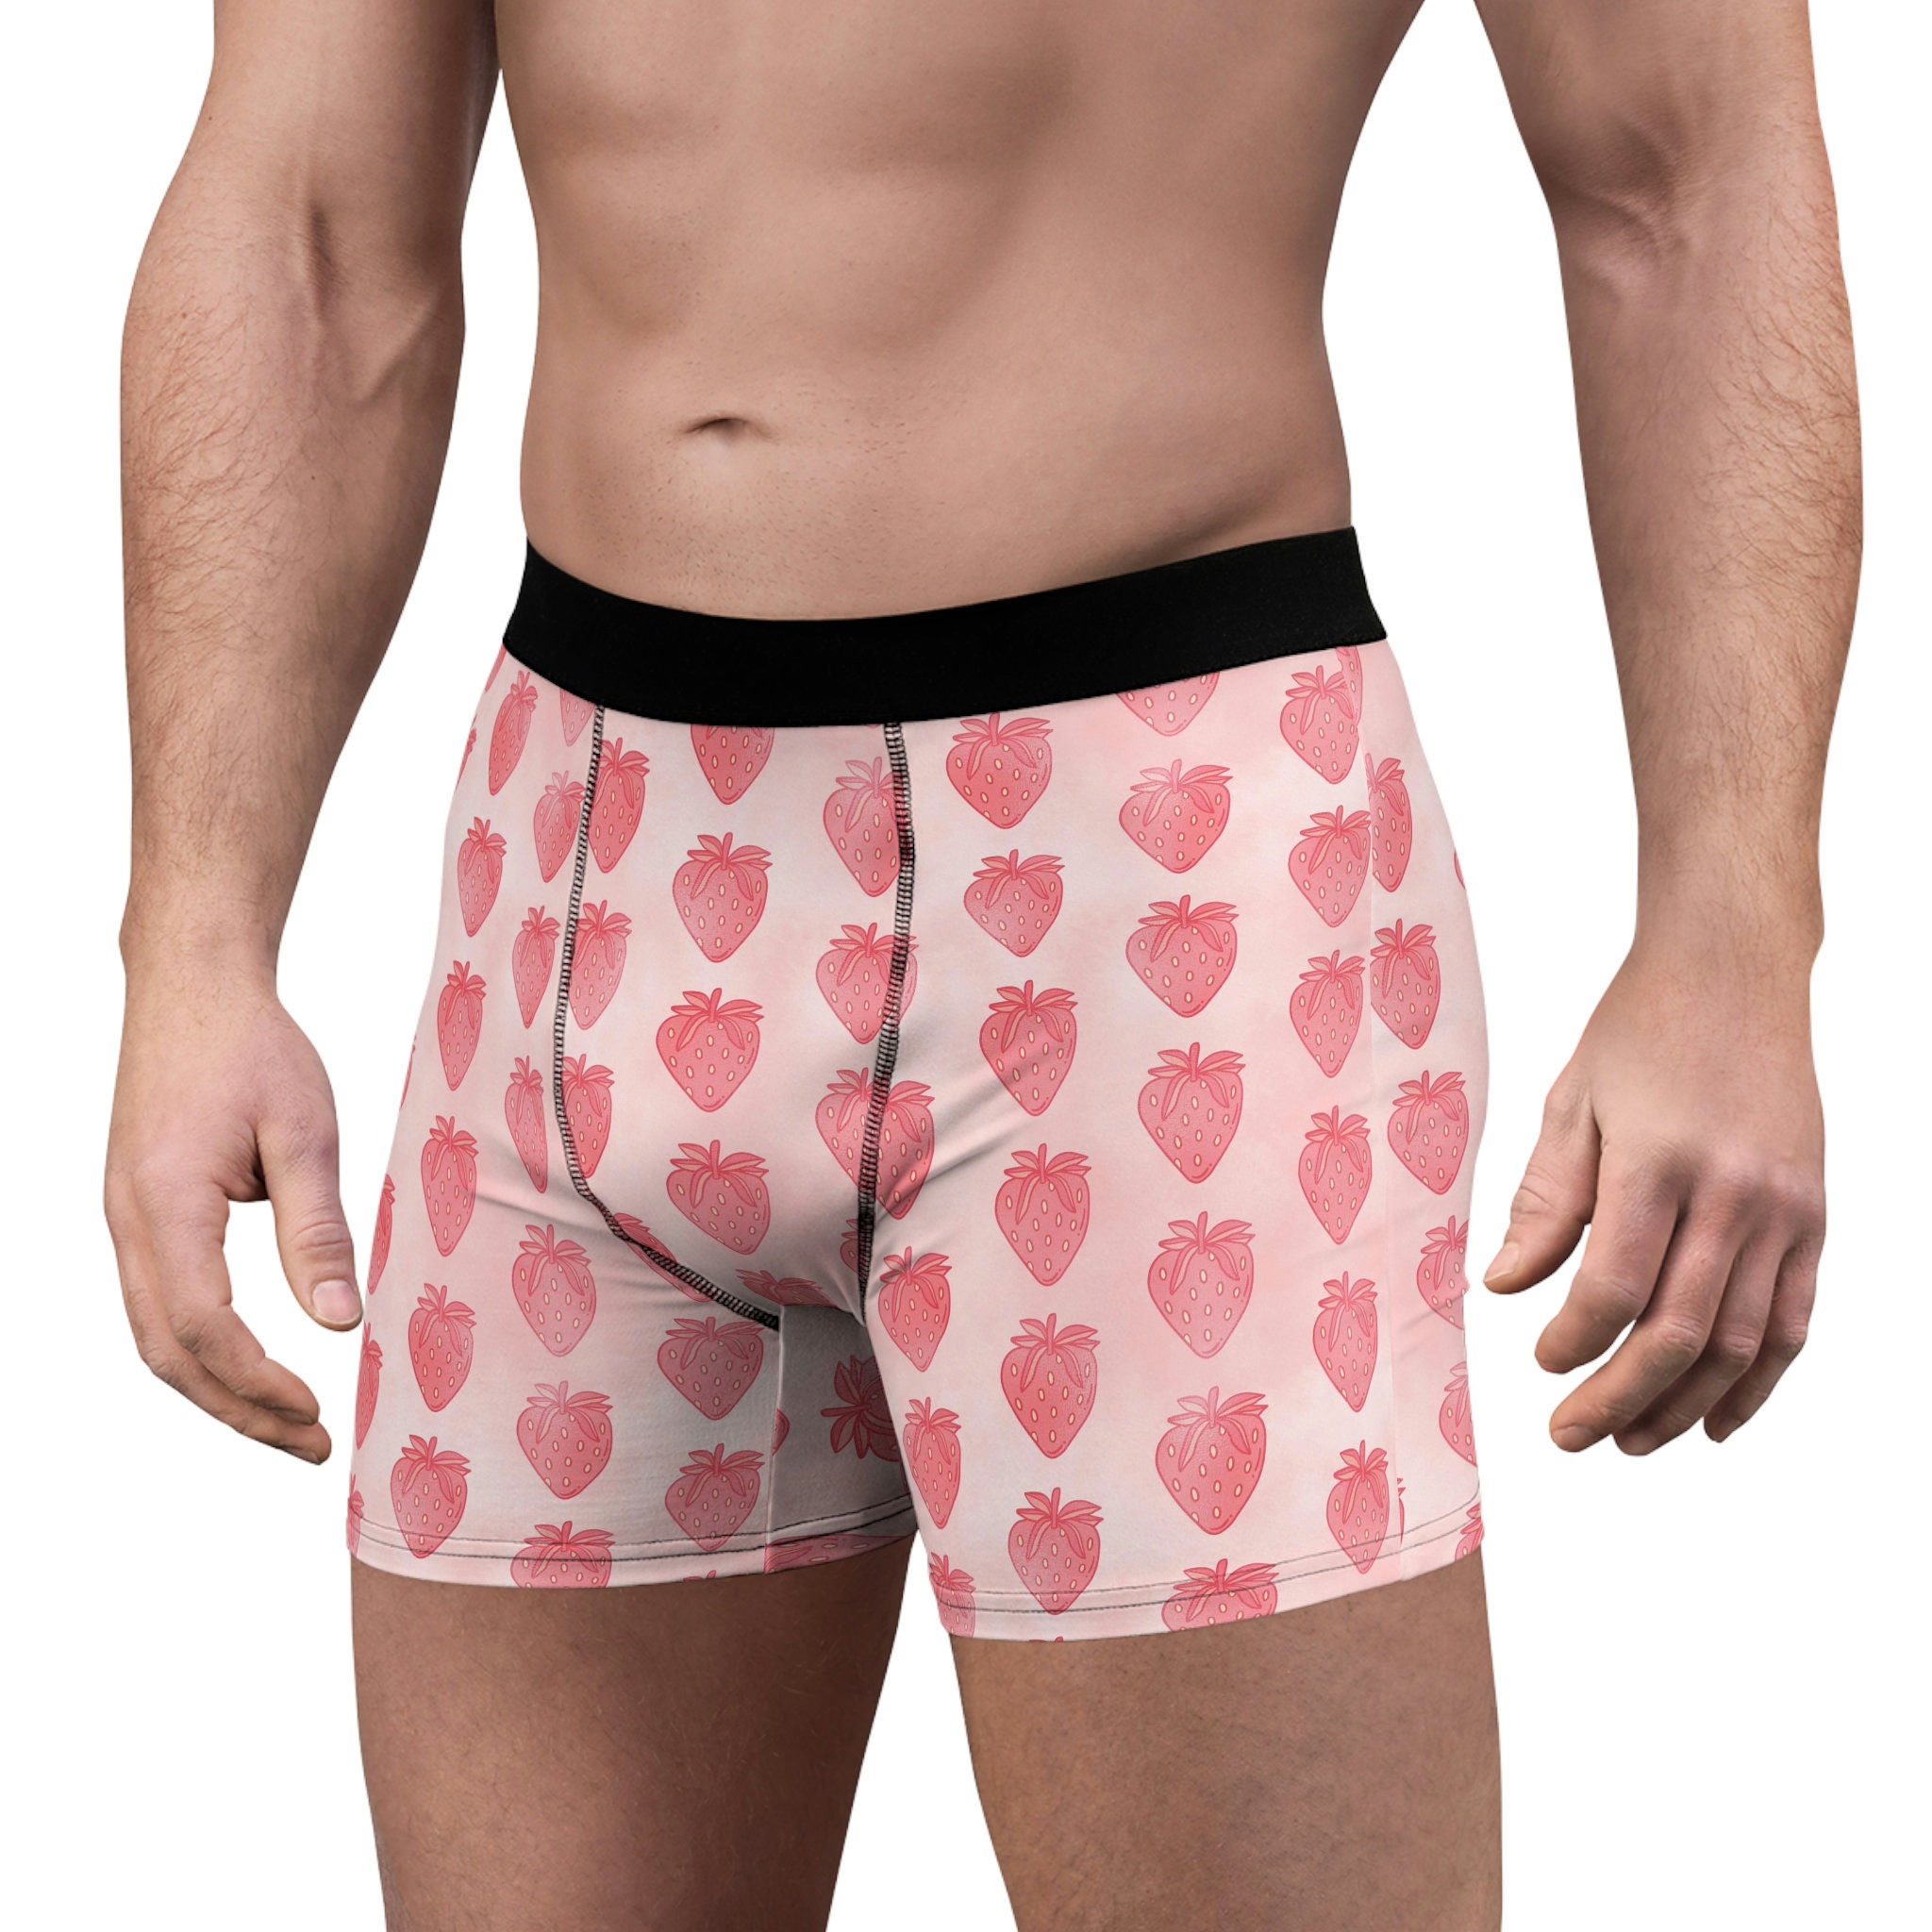 BVD Men's Modal Blend Underwear (Breathable & Sustainable Fabric